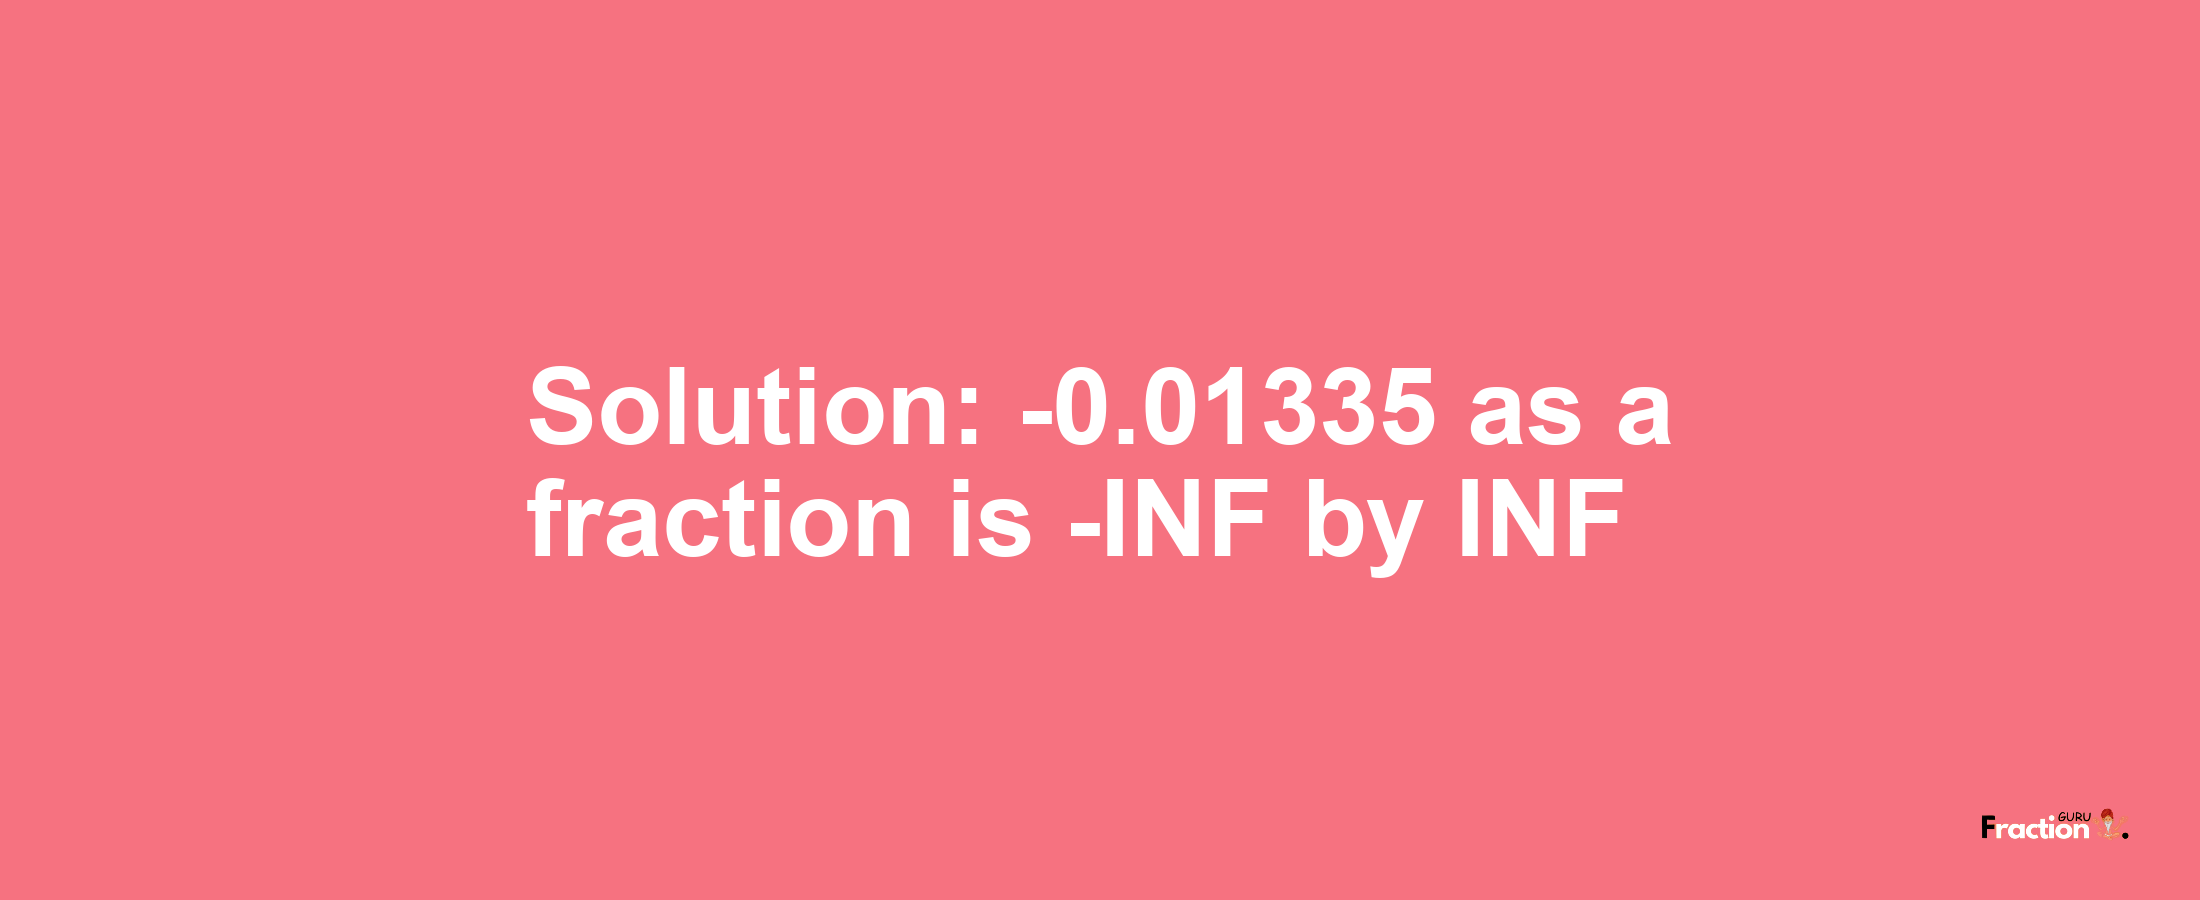 Solution:-0.01335 as a fraction is -INF/INF